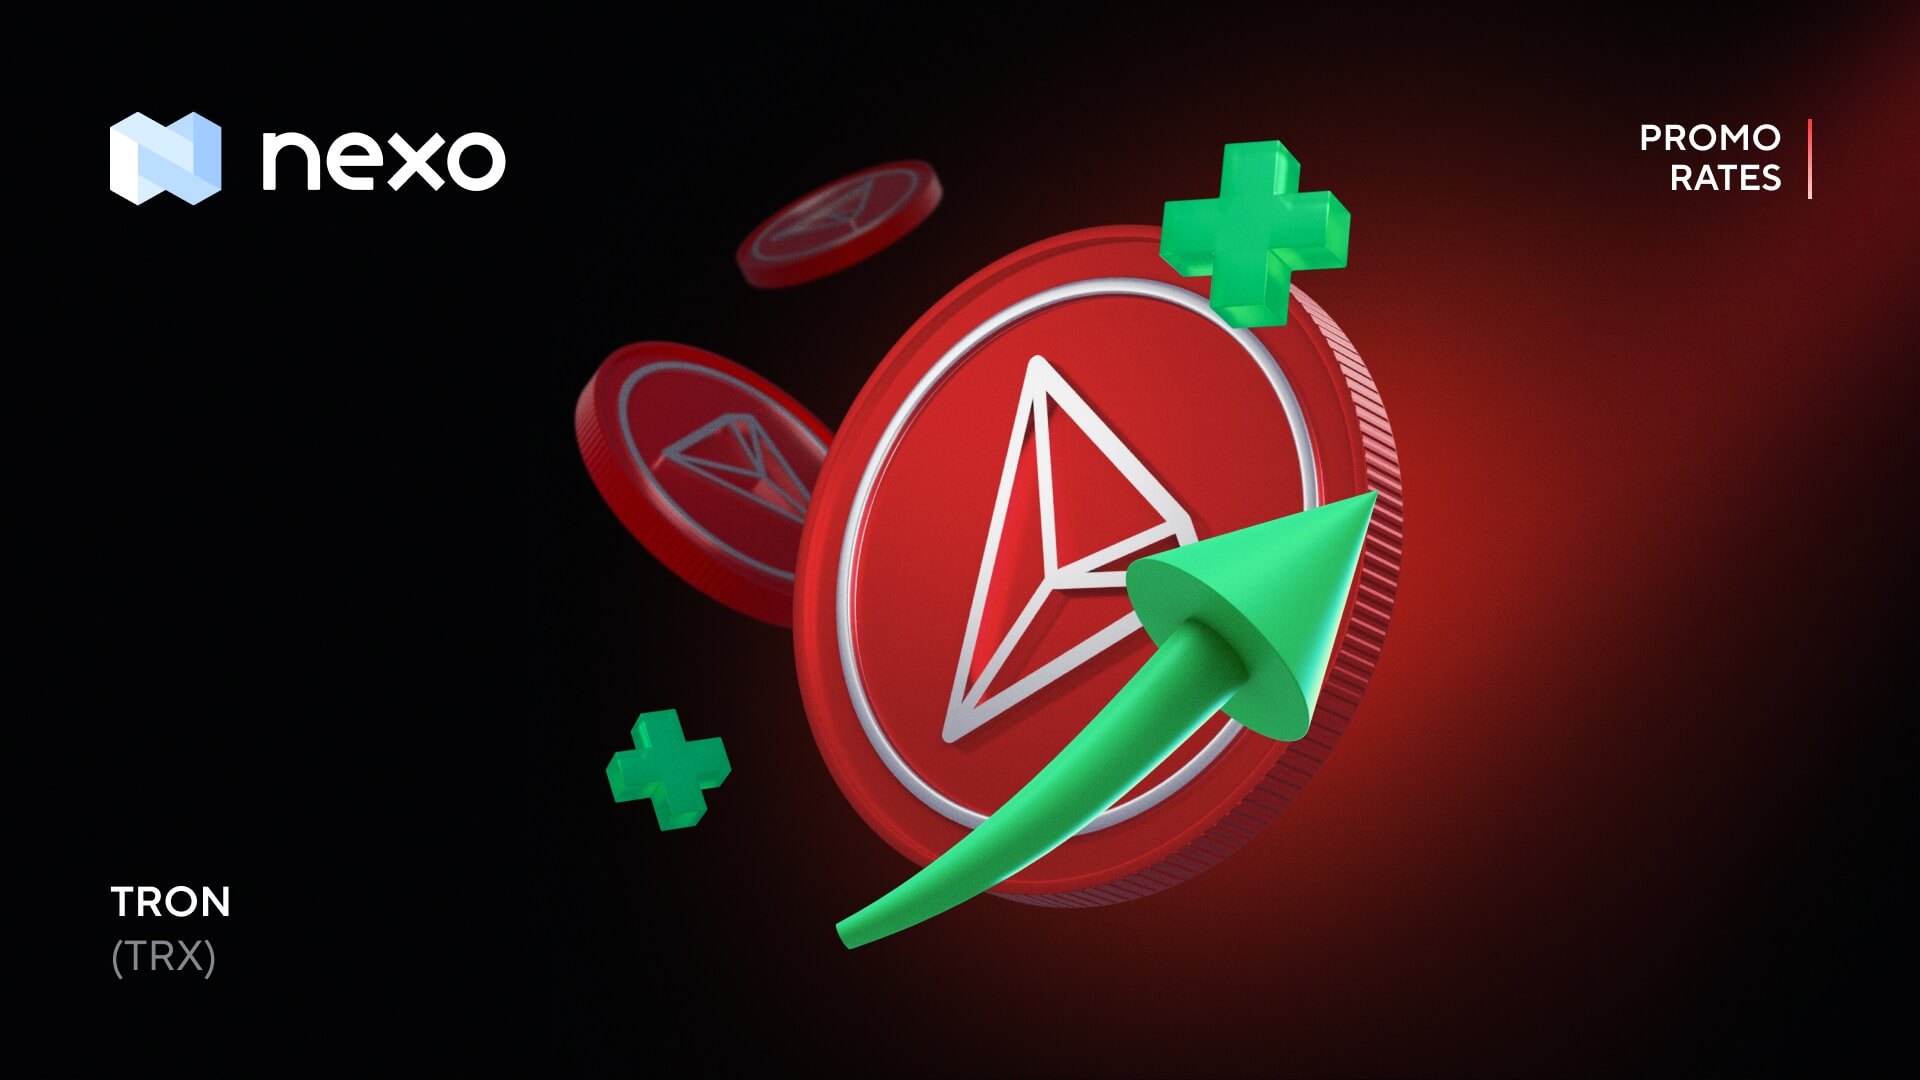 Earn Promo: Get Up to 13% APR on TRON (TRX)